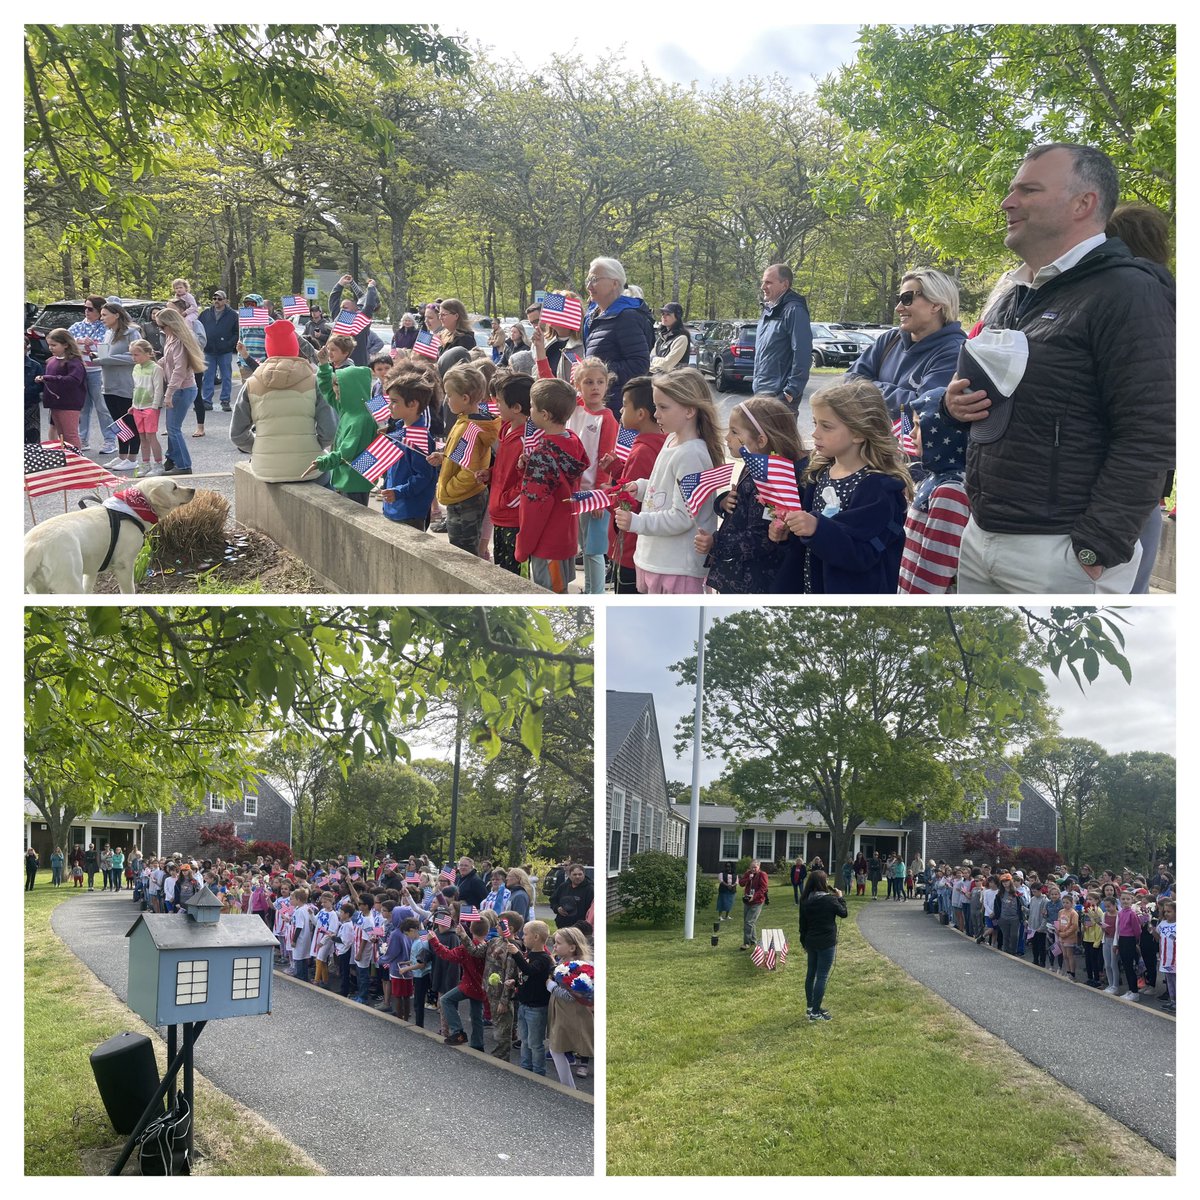 EES Community walk in honor of those courageous men and women who gave their lives in defense of our country. 🇺🇸